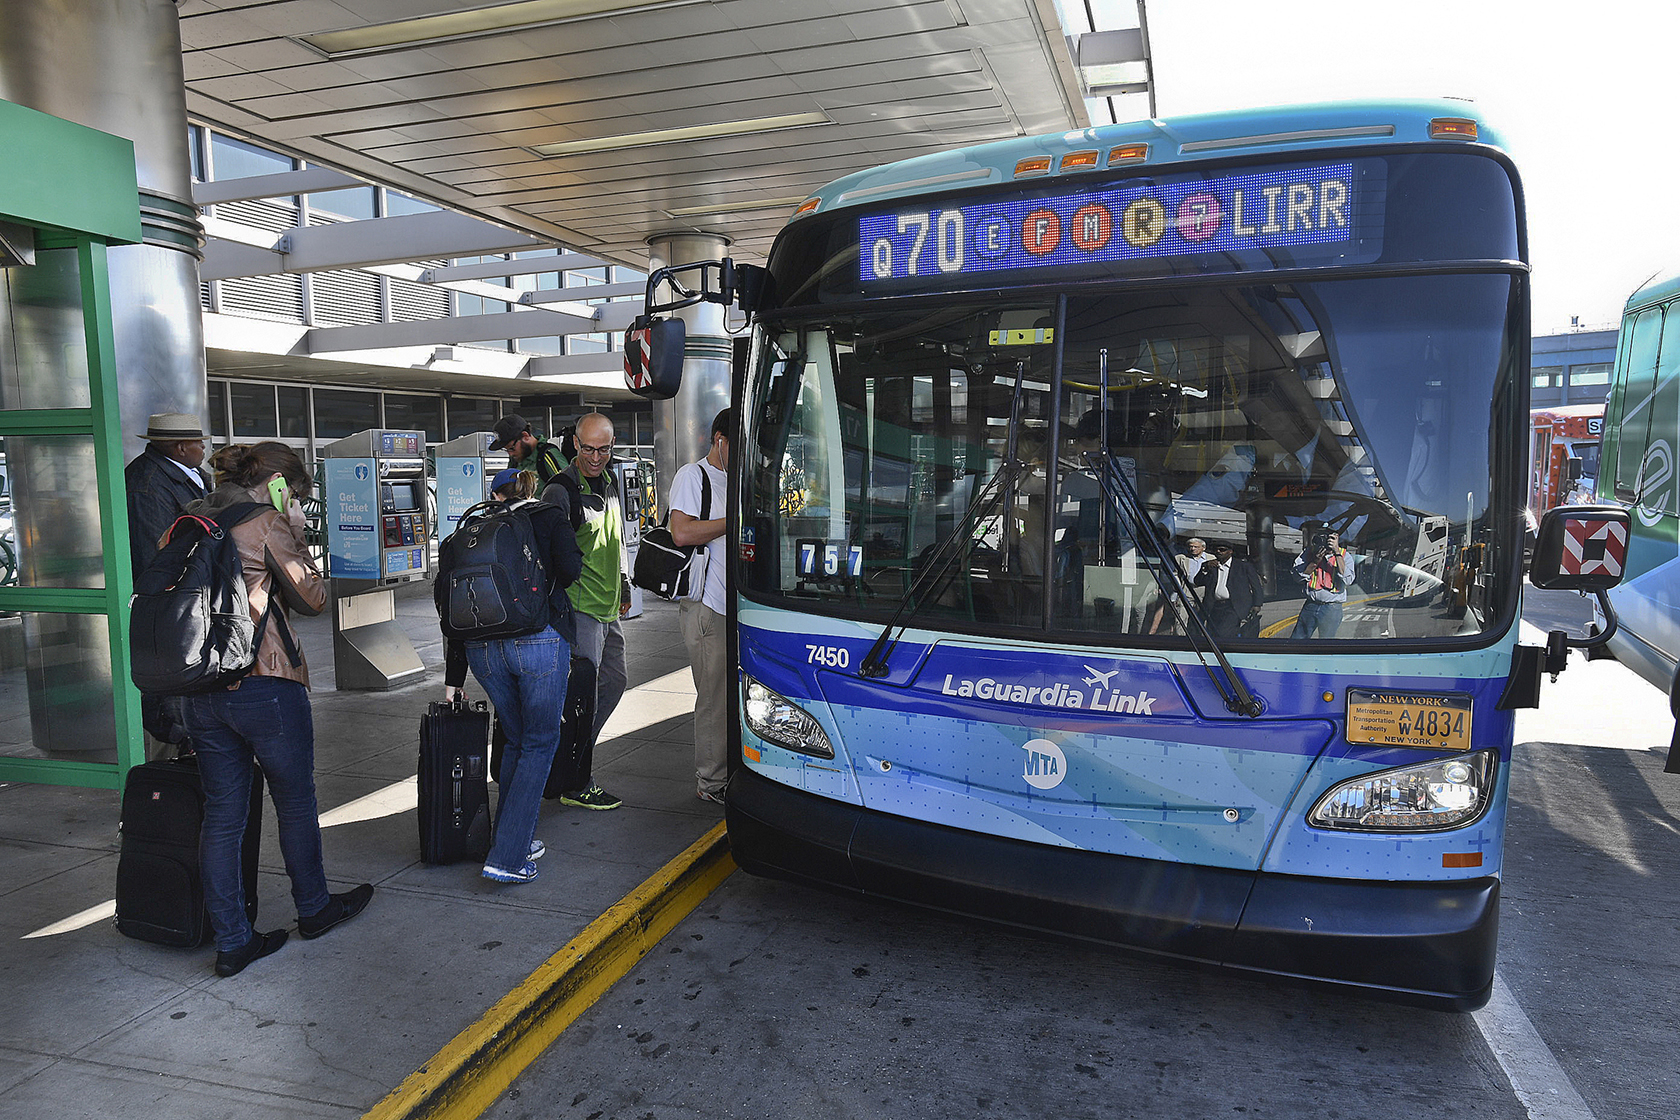 People with luggage wait to board a blue Q70 bus. The bus has a decal on the front that says LaGuardia Link.